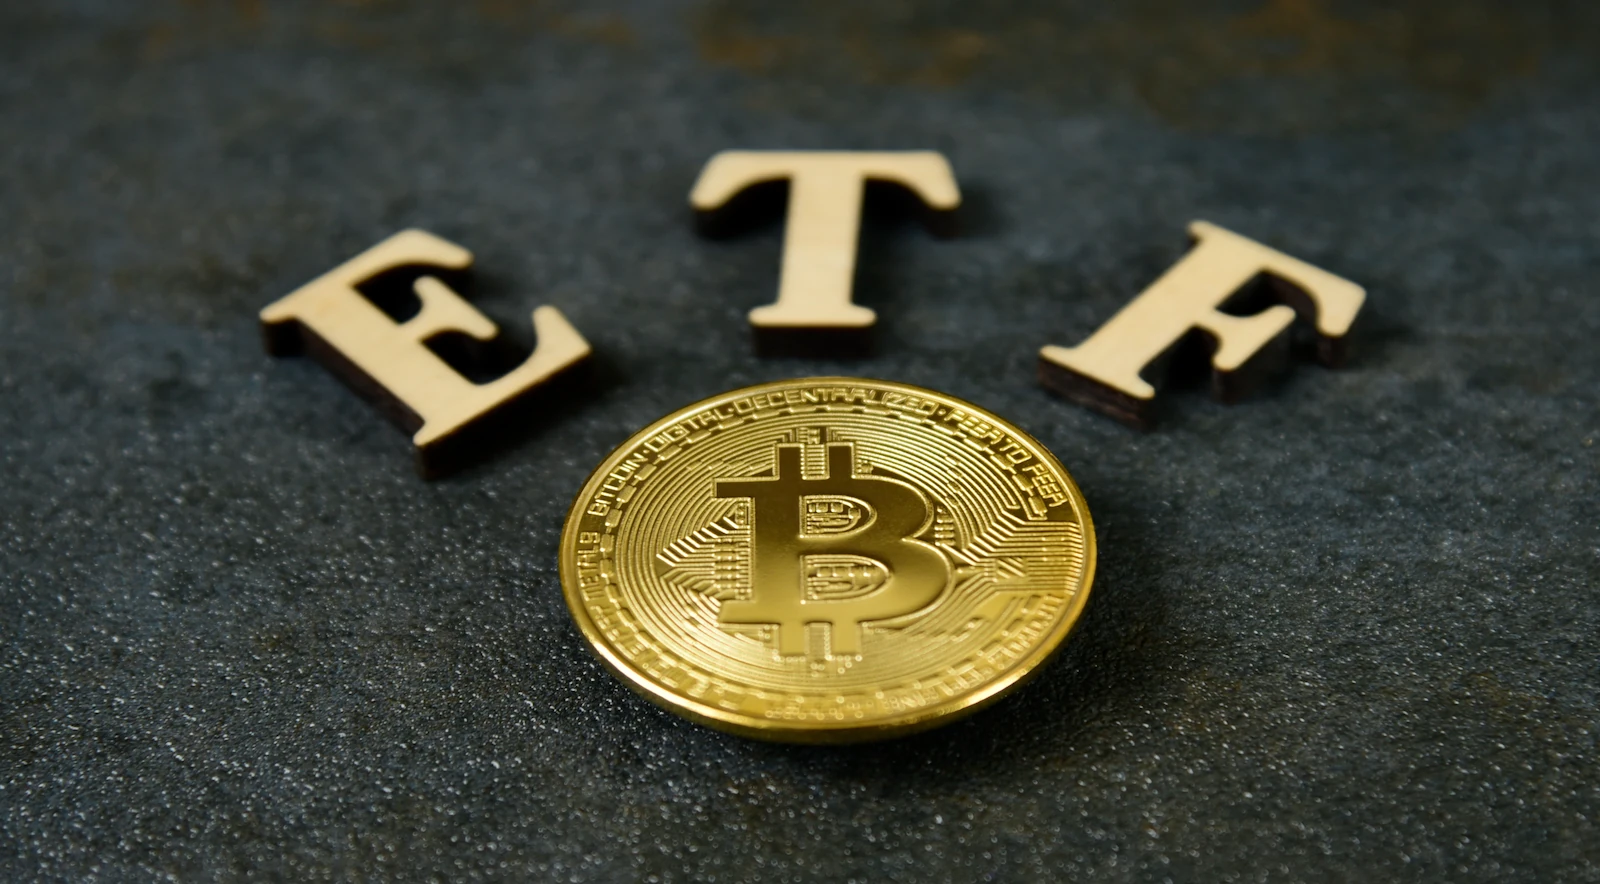 Volatility Shares Bitcoin Futures ETF went live on June 24